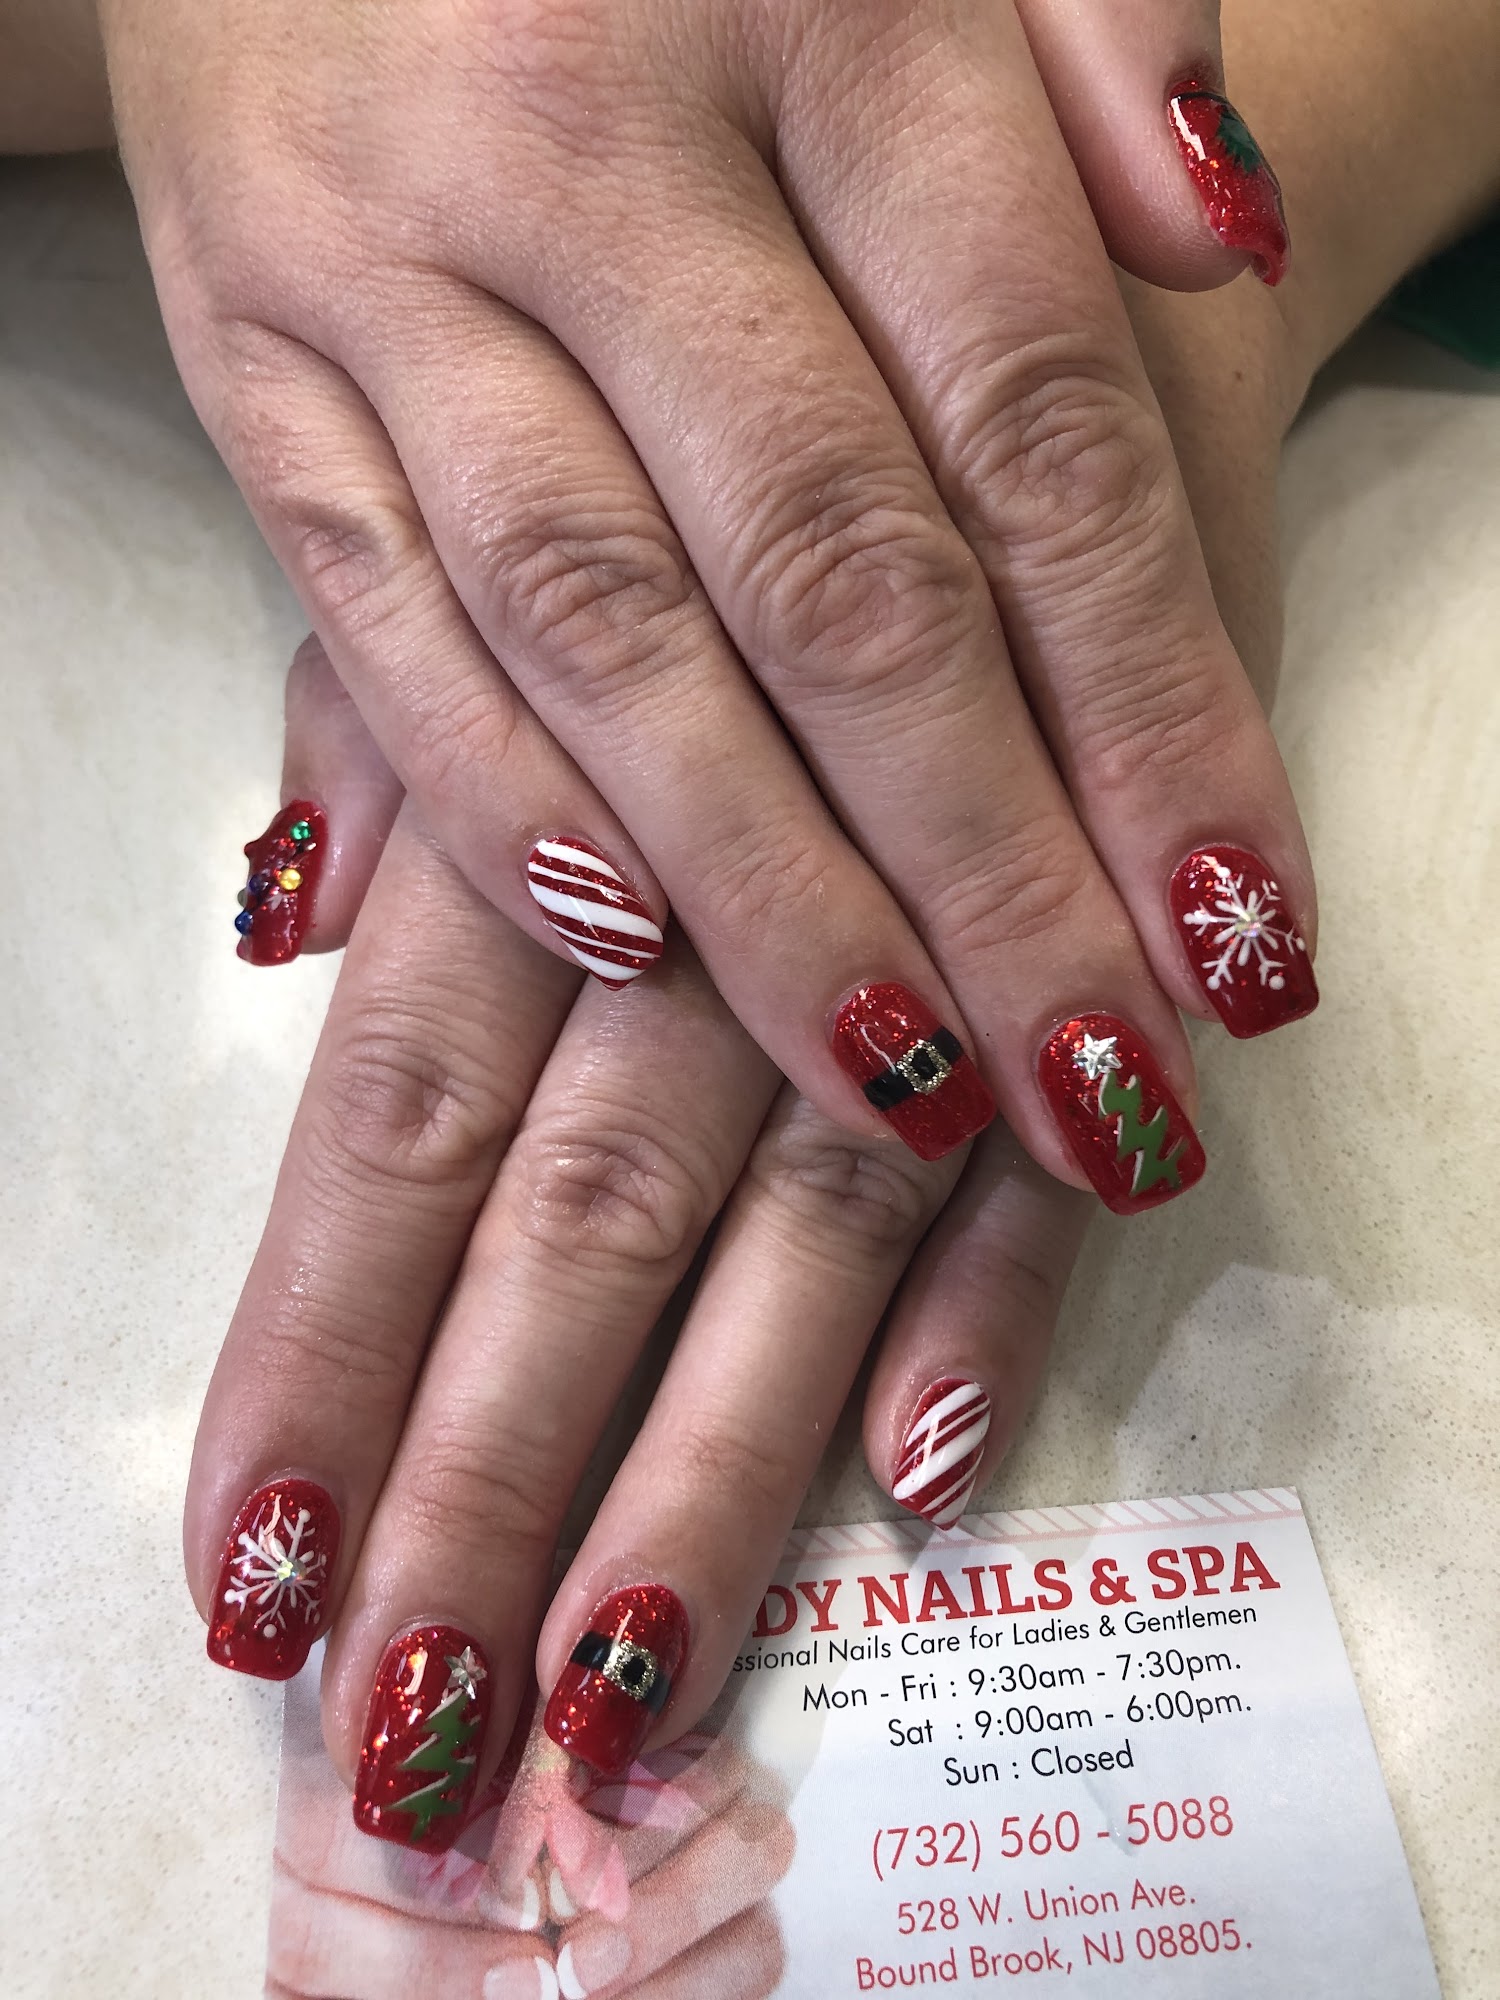 Sandys Nails And Spa Bound Brook 528 W Union Ave #2, Bound Brook New Jersey 08805